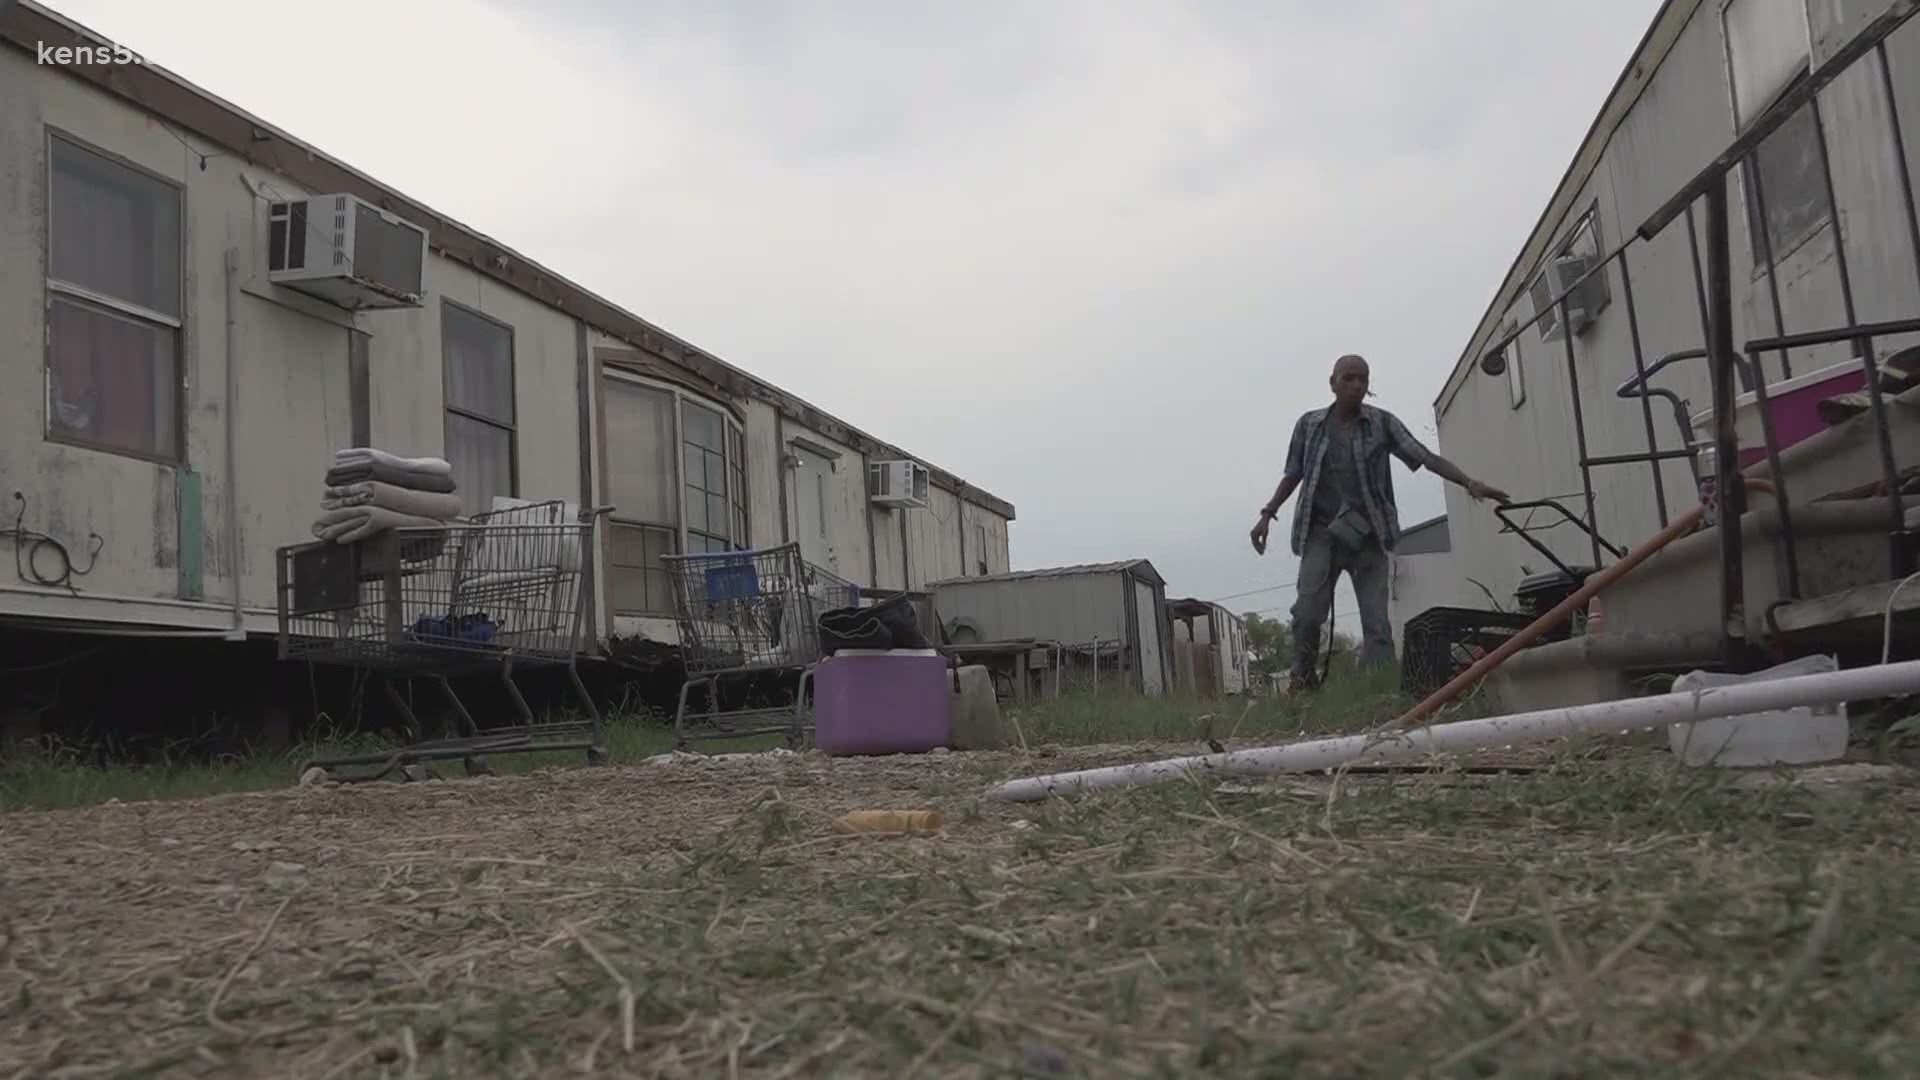 The San Antonio mobile home park is shutting down after years of criminal activity and code violations. But some residents have nowhere to go.